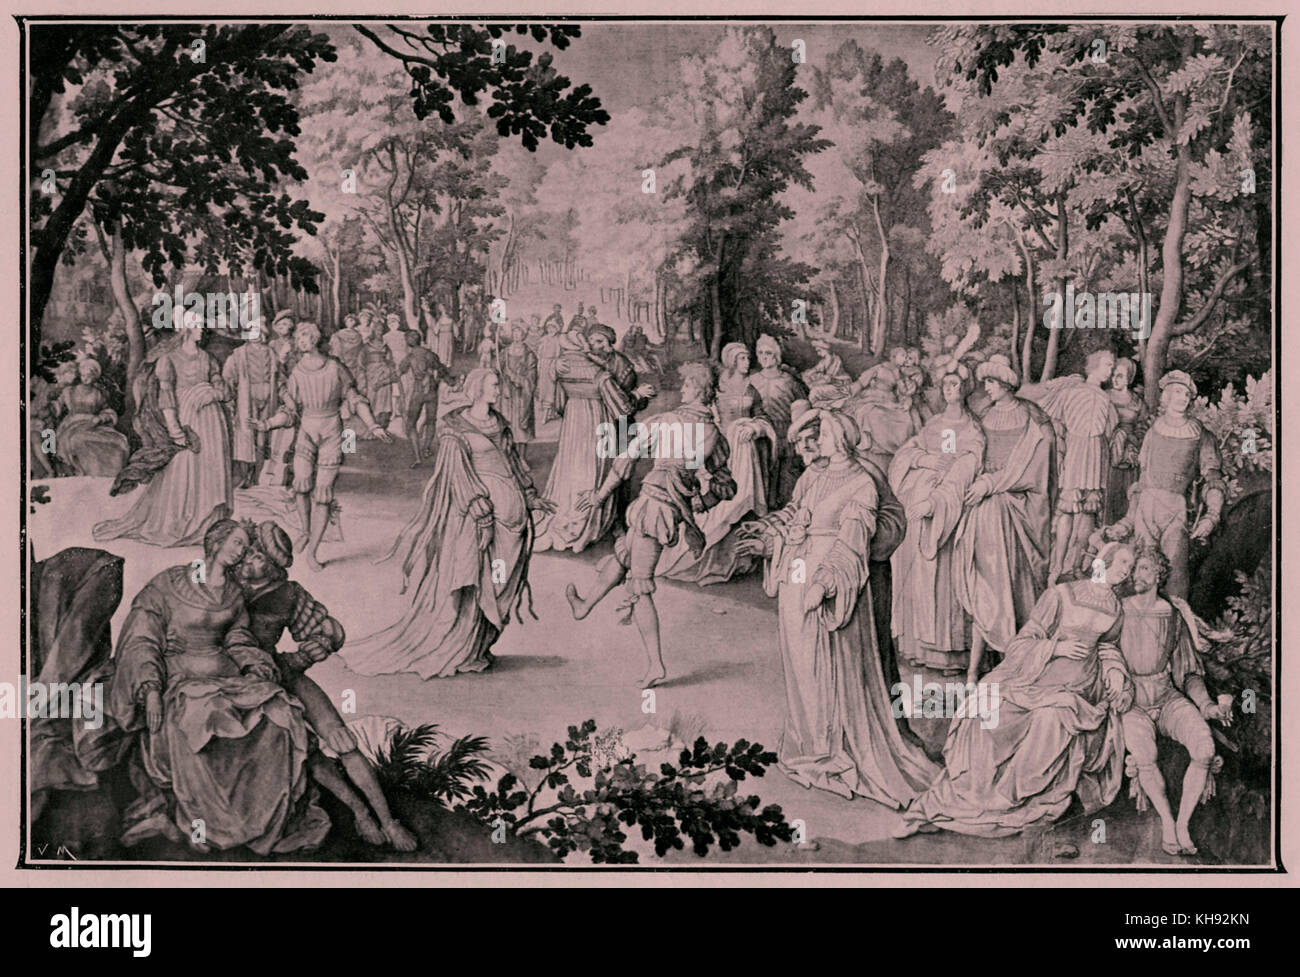 Ball in the Flemish court, 16th century. From engraving after painting by unknown artist. Stock Photo